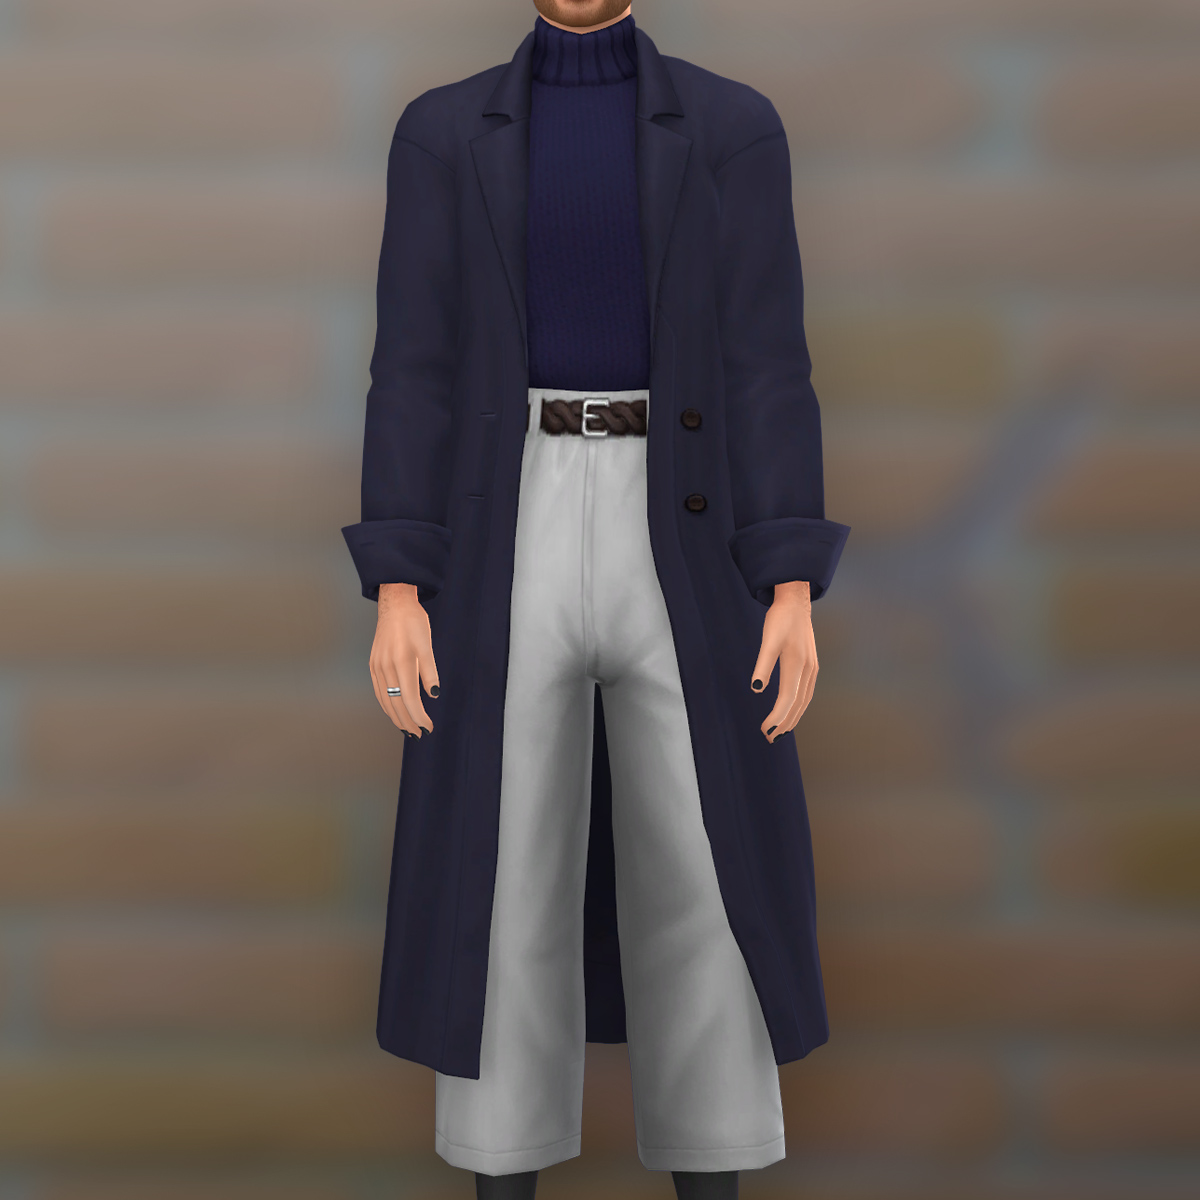 QICC - Clement Outfit project avatar